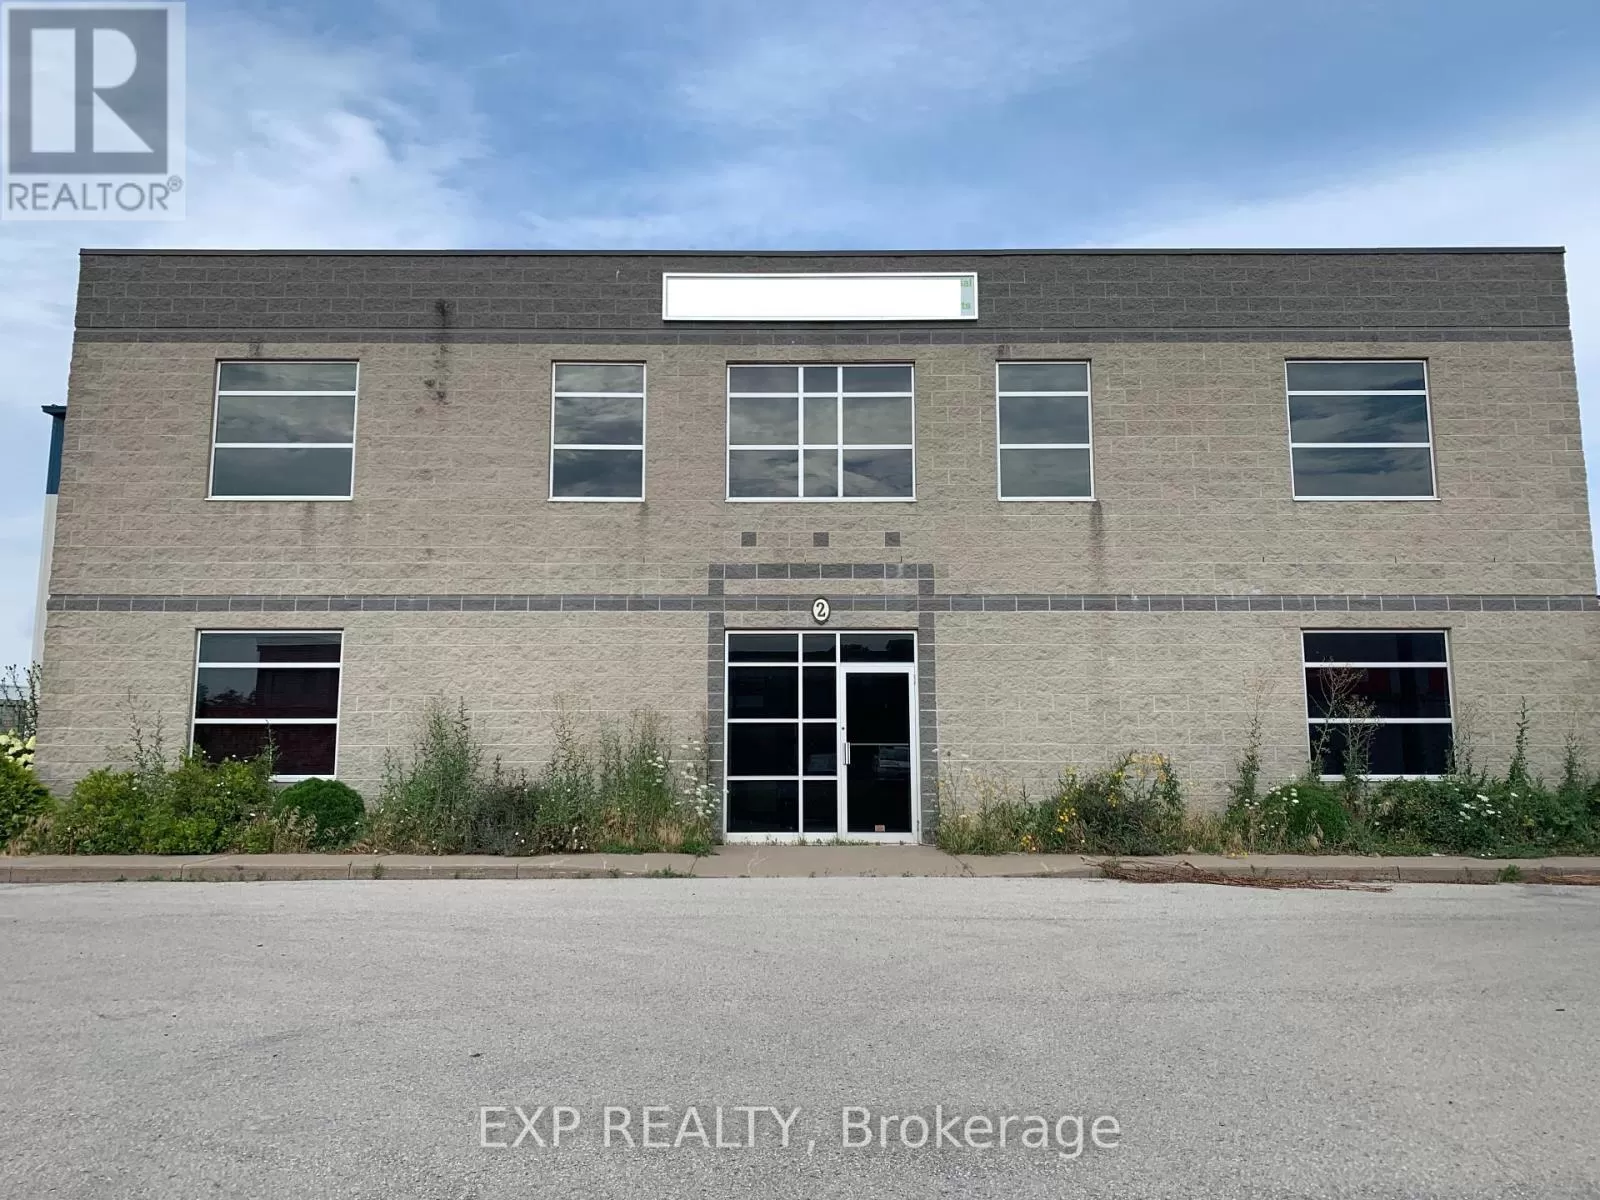 Offices for rent: #upp.of -2 Keefer Rd, St. Catharines, Ontario L2M 7N9